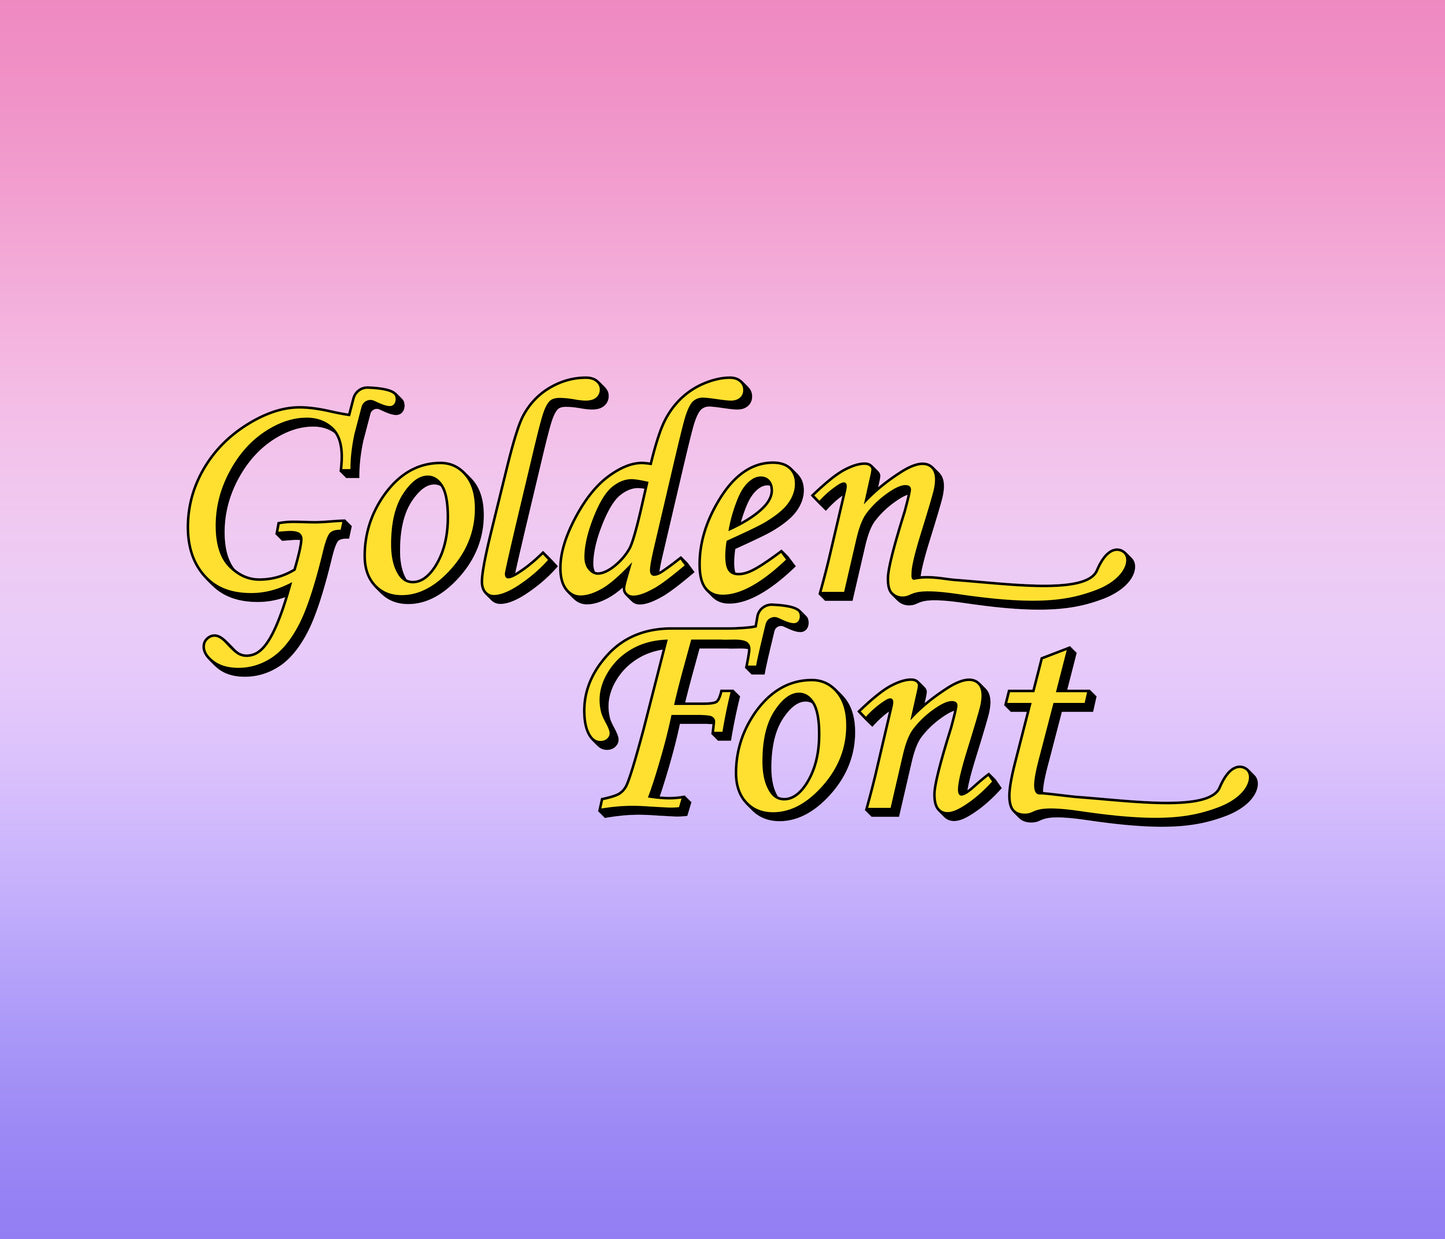 Celebrate Classic Charm with The Golden Girls-Inspired Font